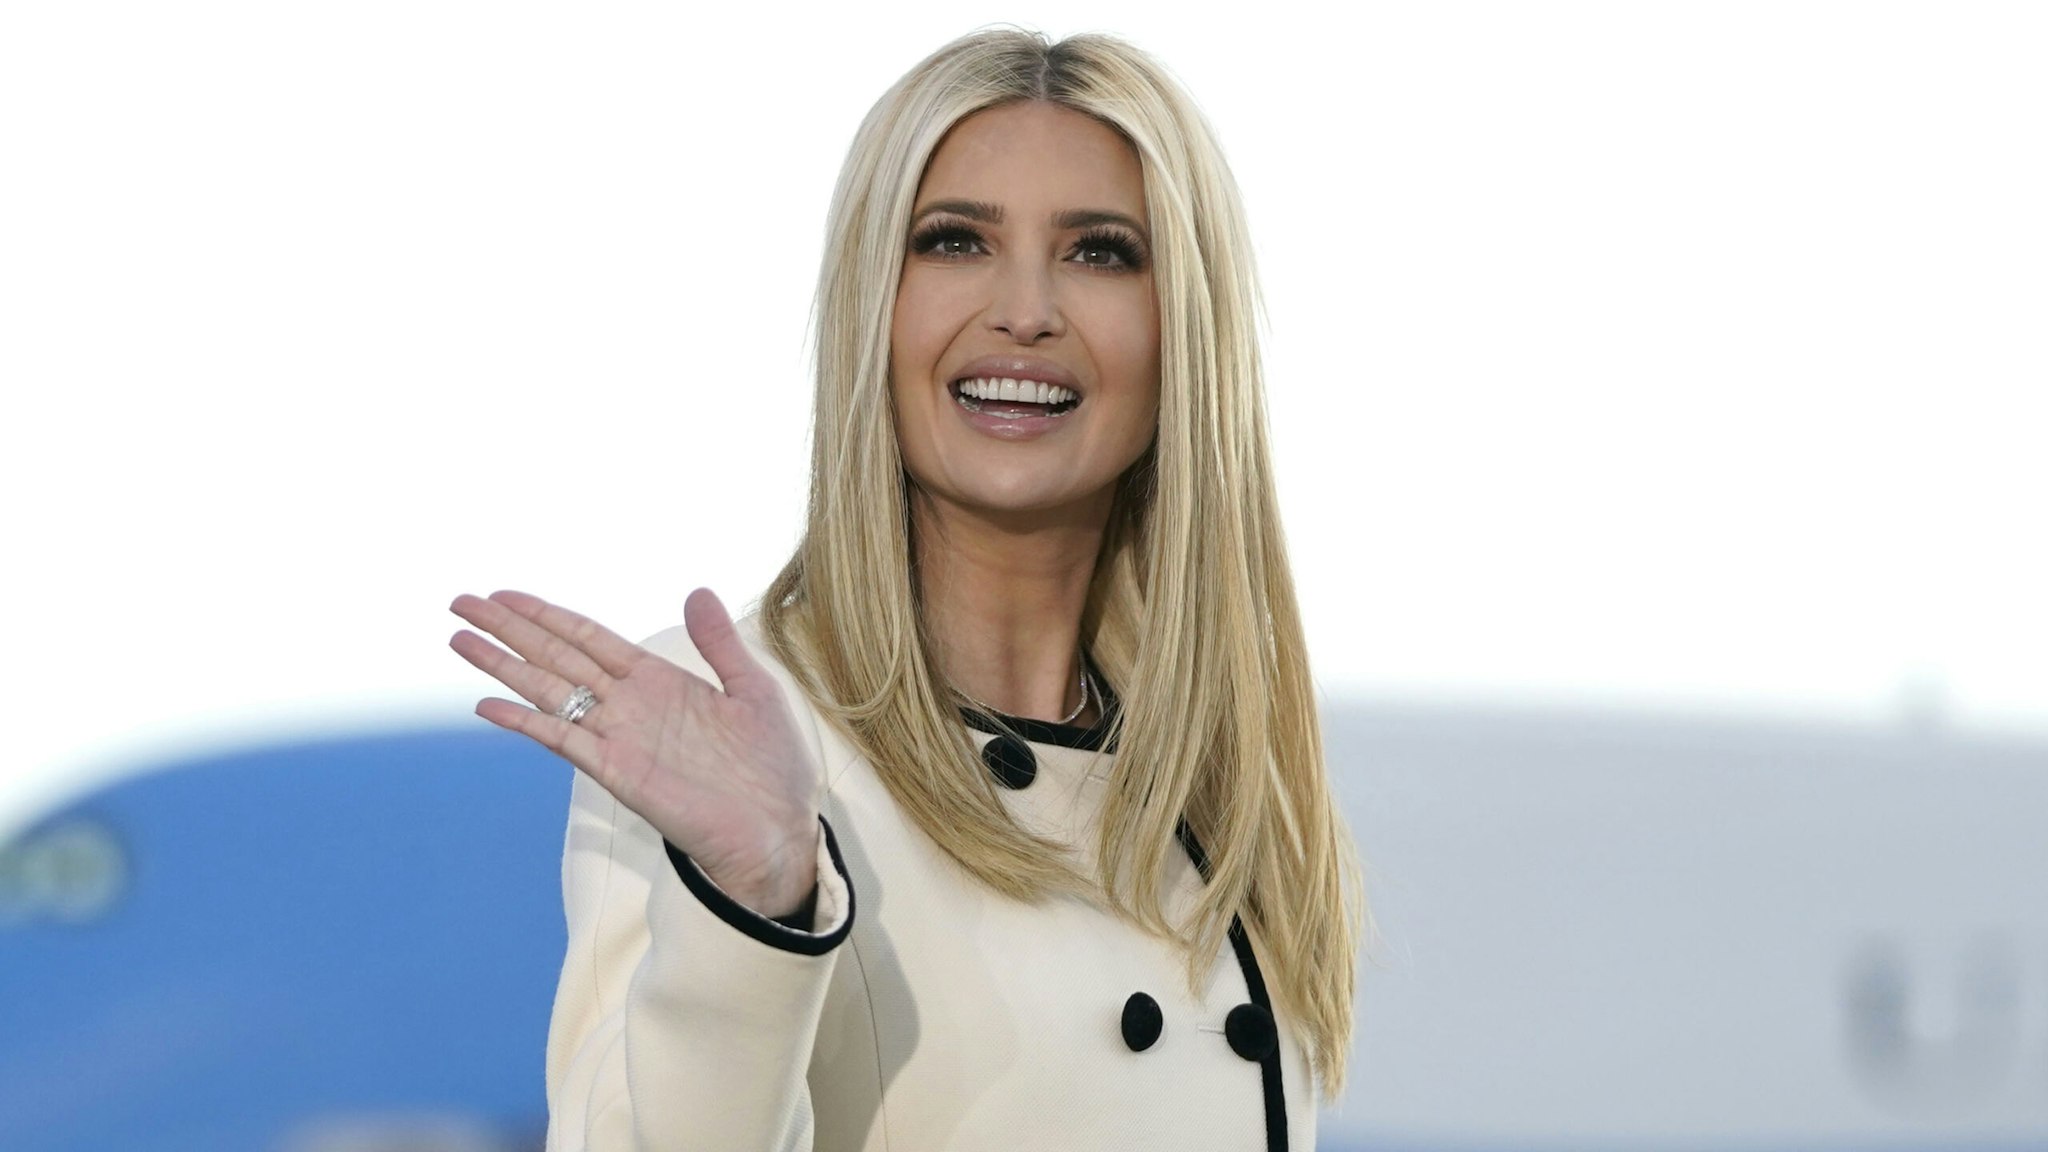 Ivanka Trump waves as she arrives at Joint Base Andrews in Maryland for US President Donald Trump's departure on January 20, 2021. - President Trump travels to his Mar-a-Lago golf club residence in Palm Beach, Florida, and will not attend the inauguration for President-elect Joe Biden.